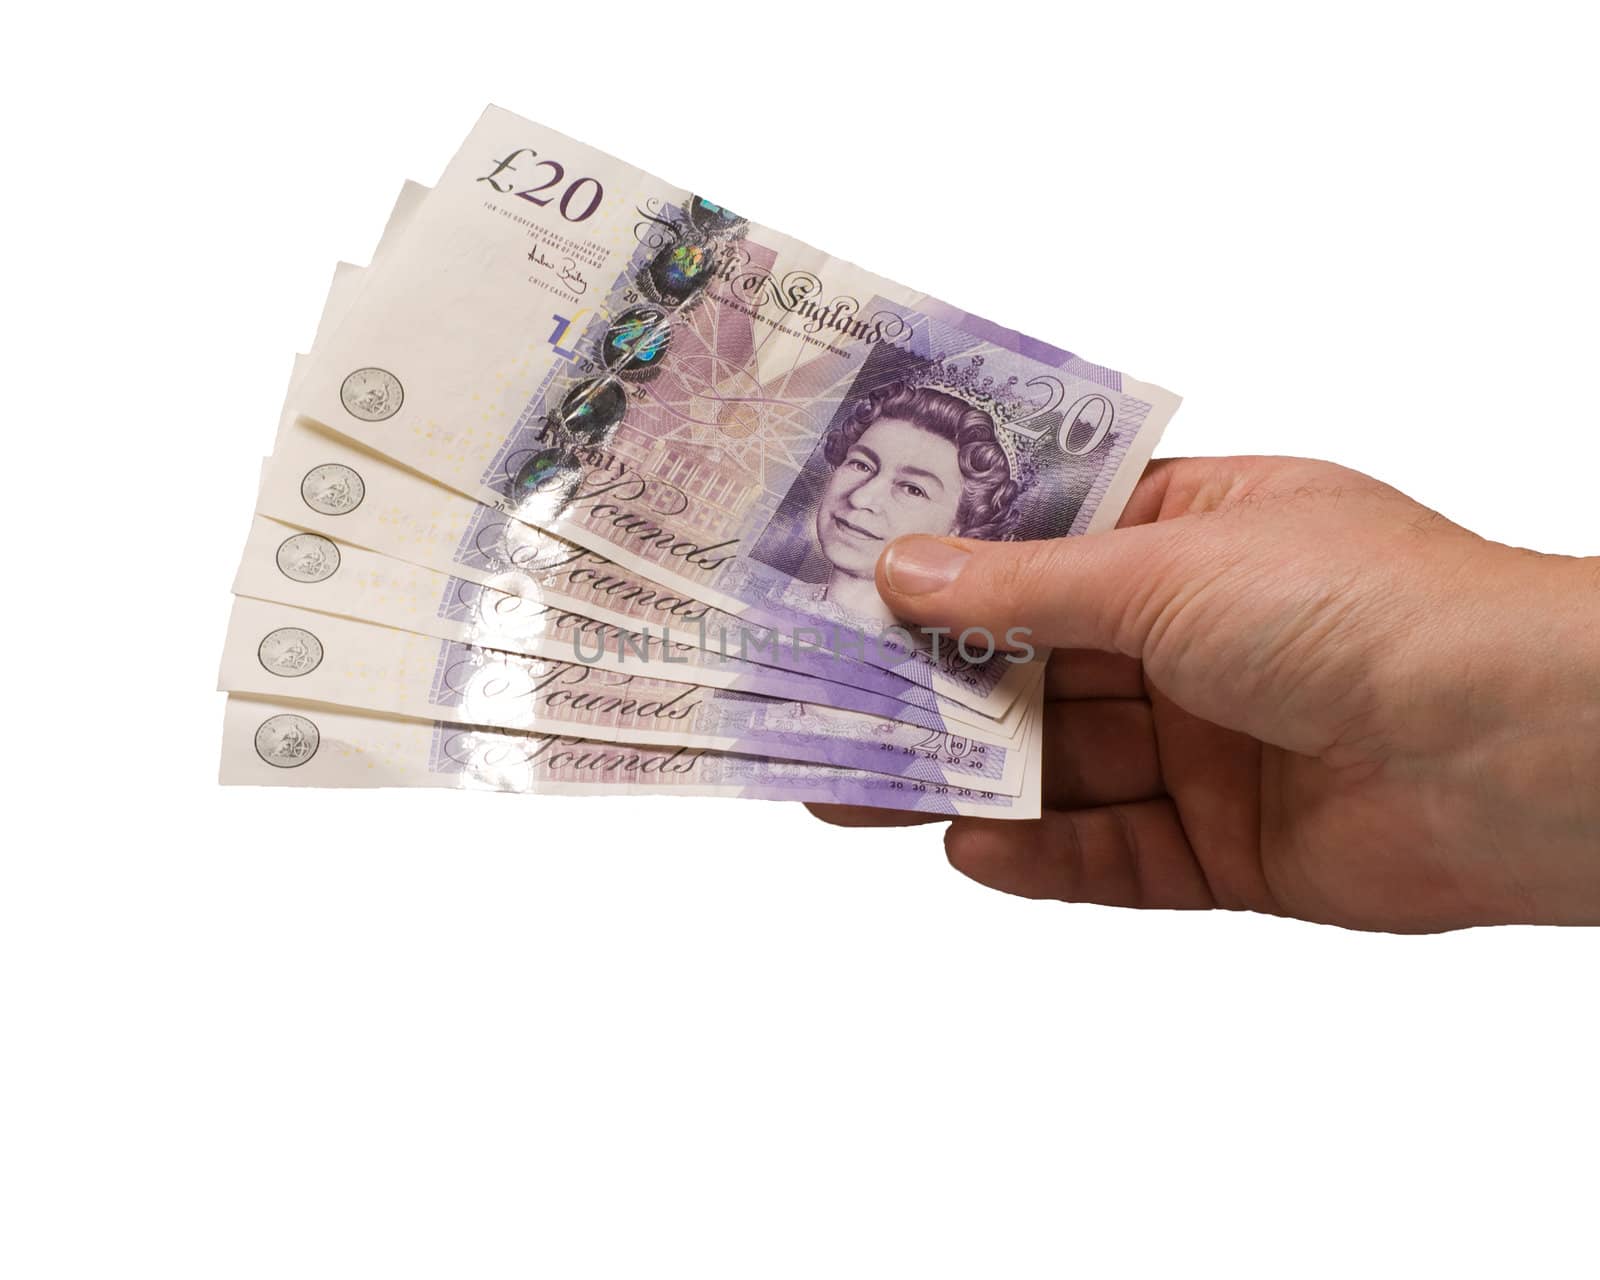 british pound notes being held in a hand holding out 